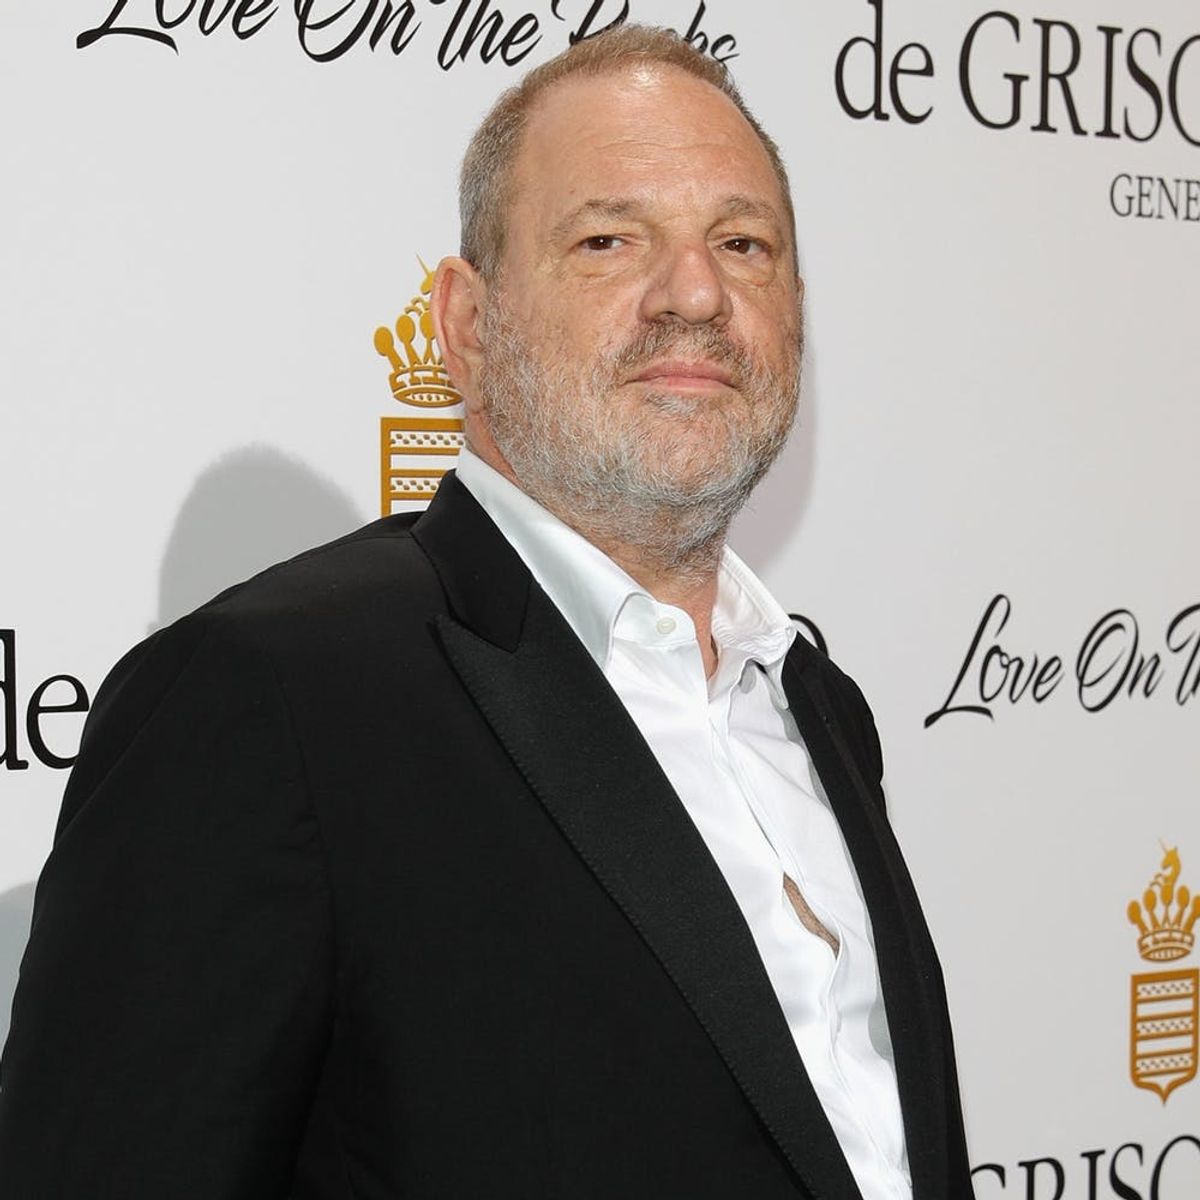 Harvey Weinstein Has Been Expelled from the Academy of Motion Picture Arts and Sciences